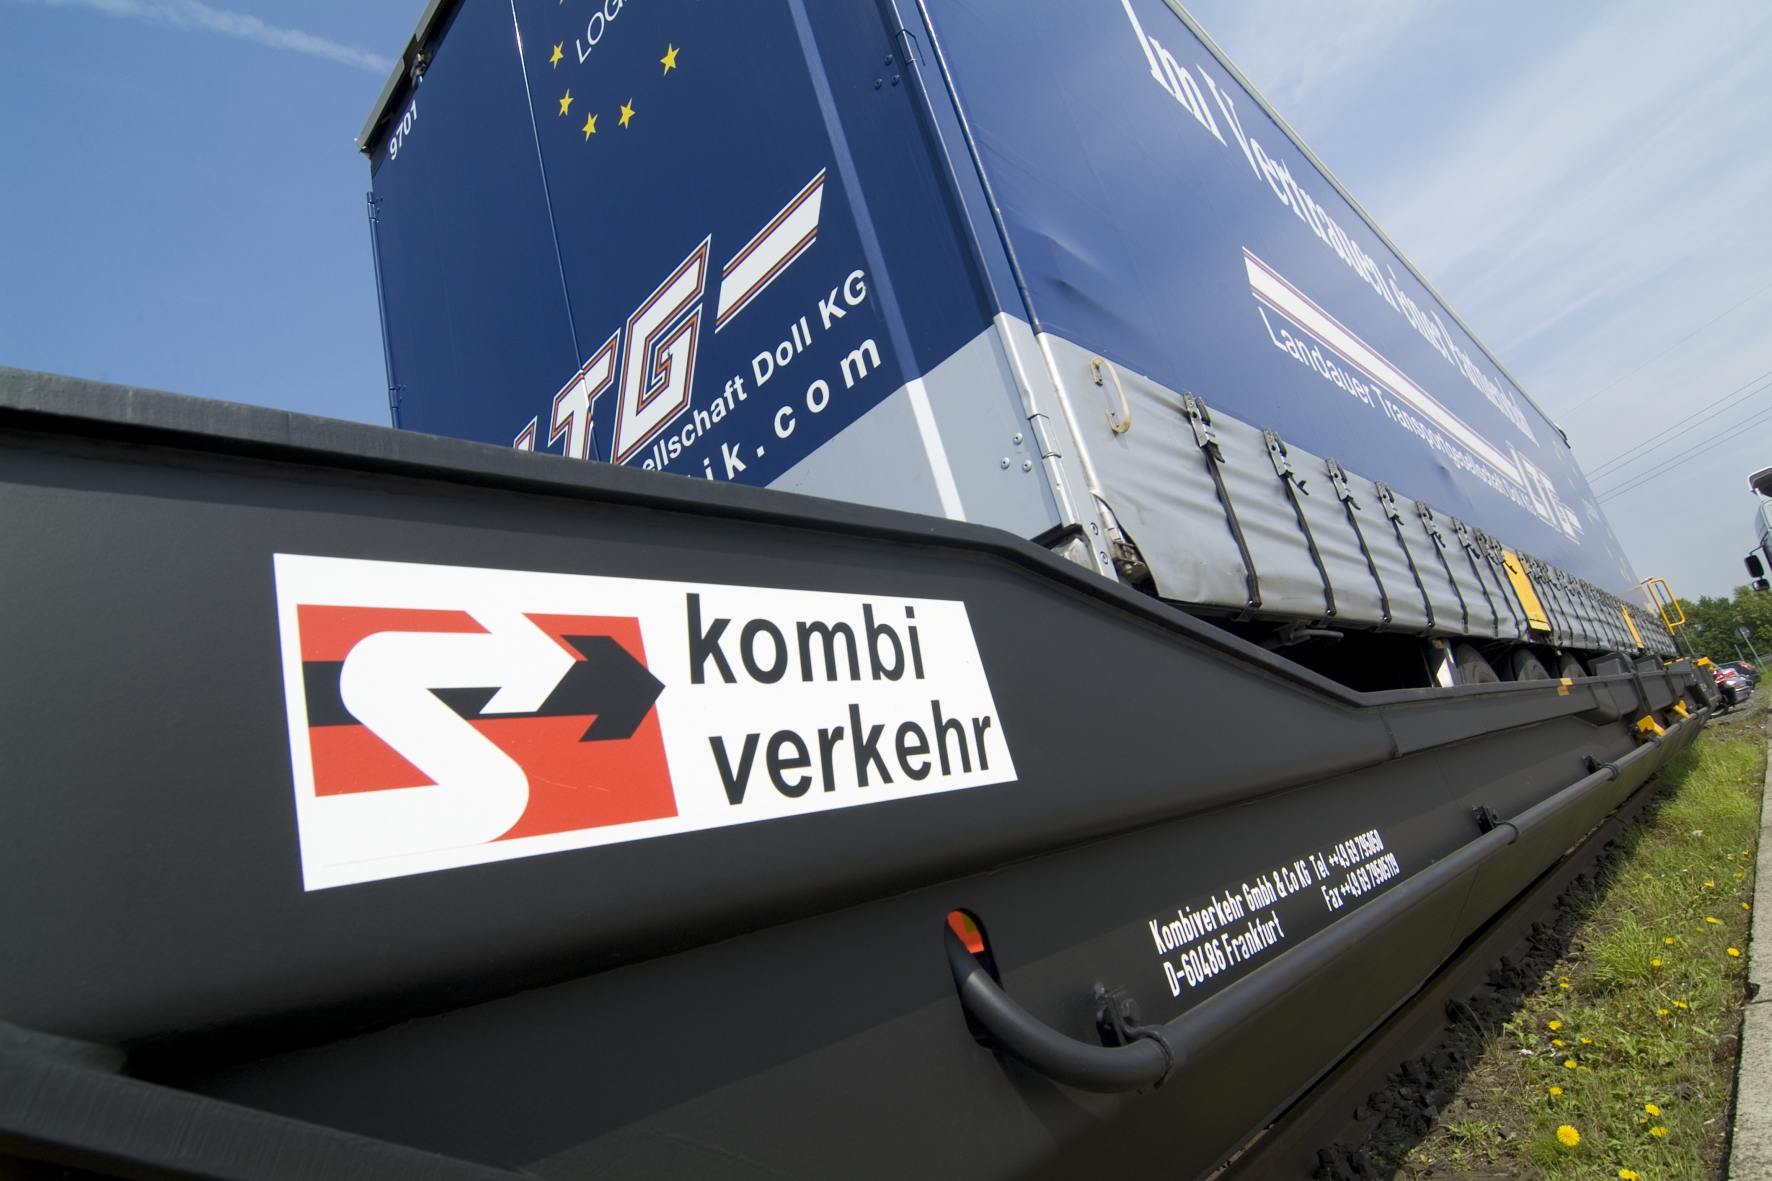 Kombiverkehr launches new Greece service from Wels